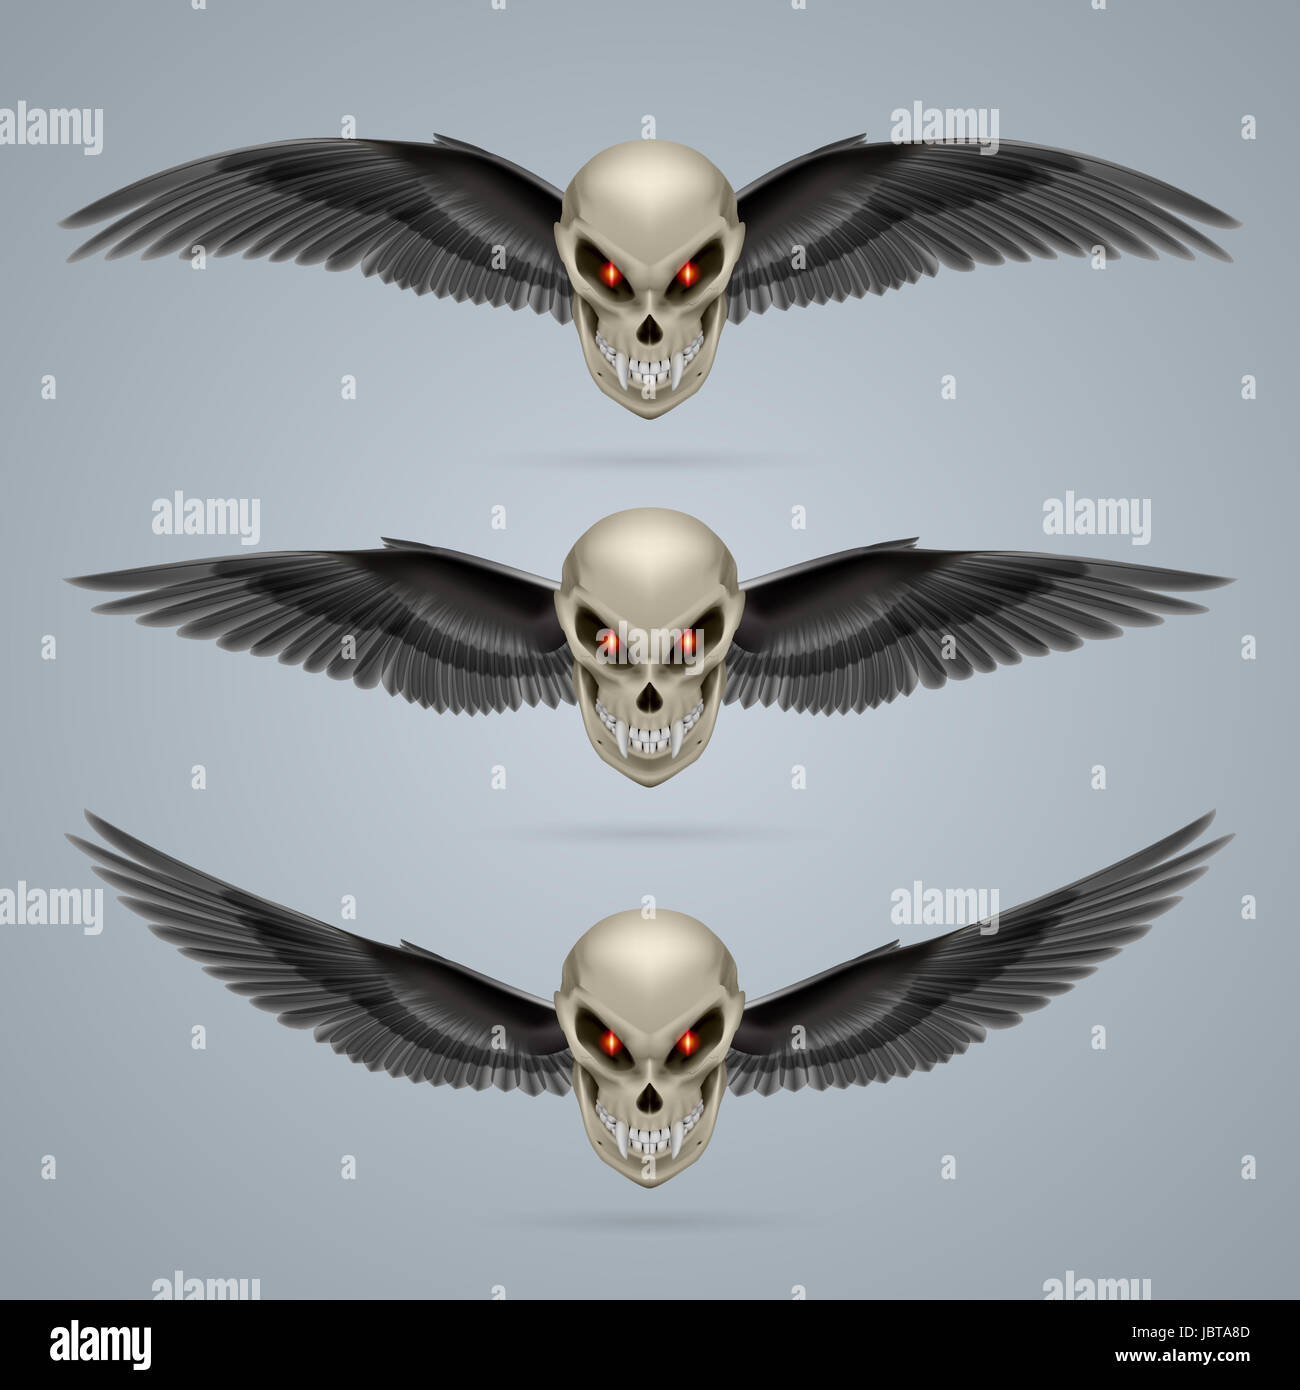 Set of mutant skulls with long fangs and black wings Stock Photo